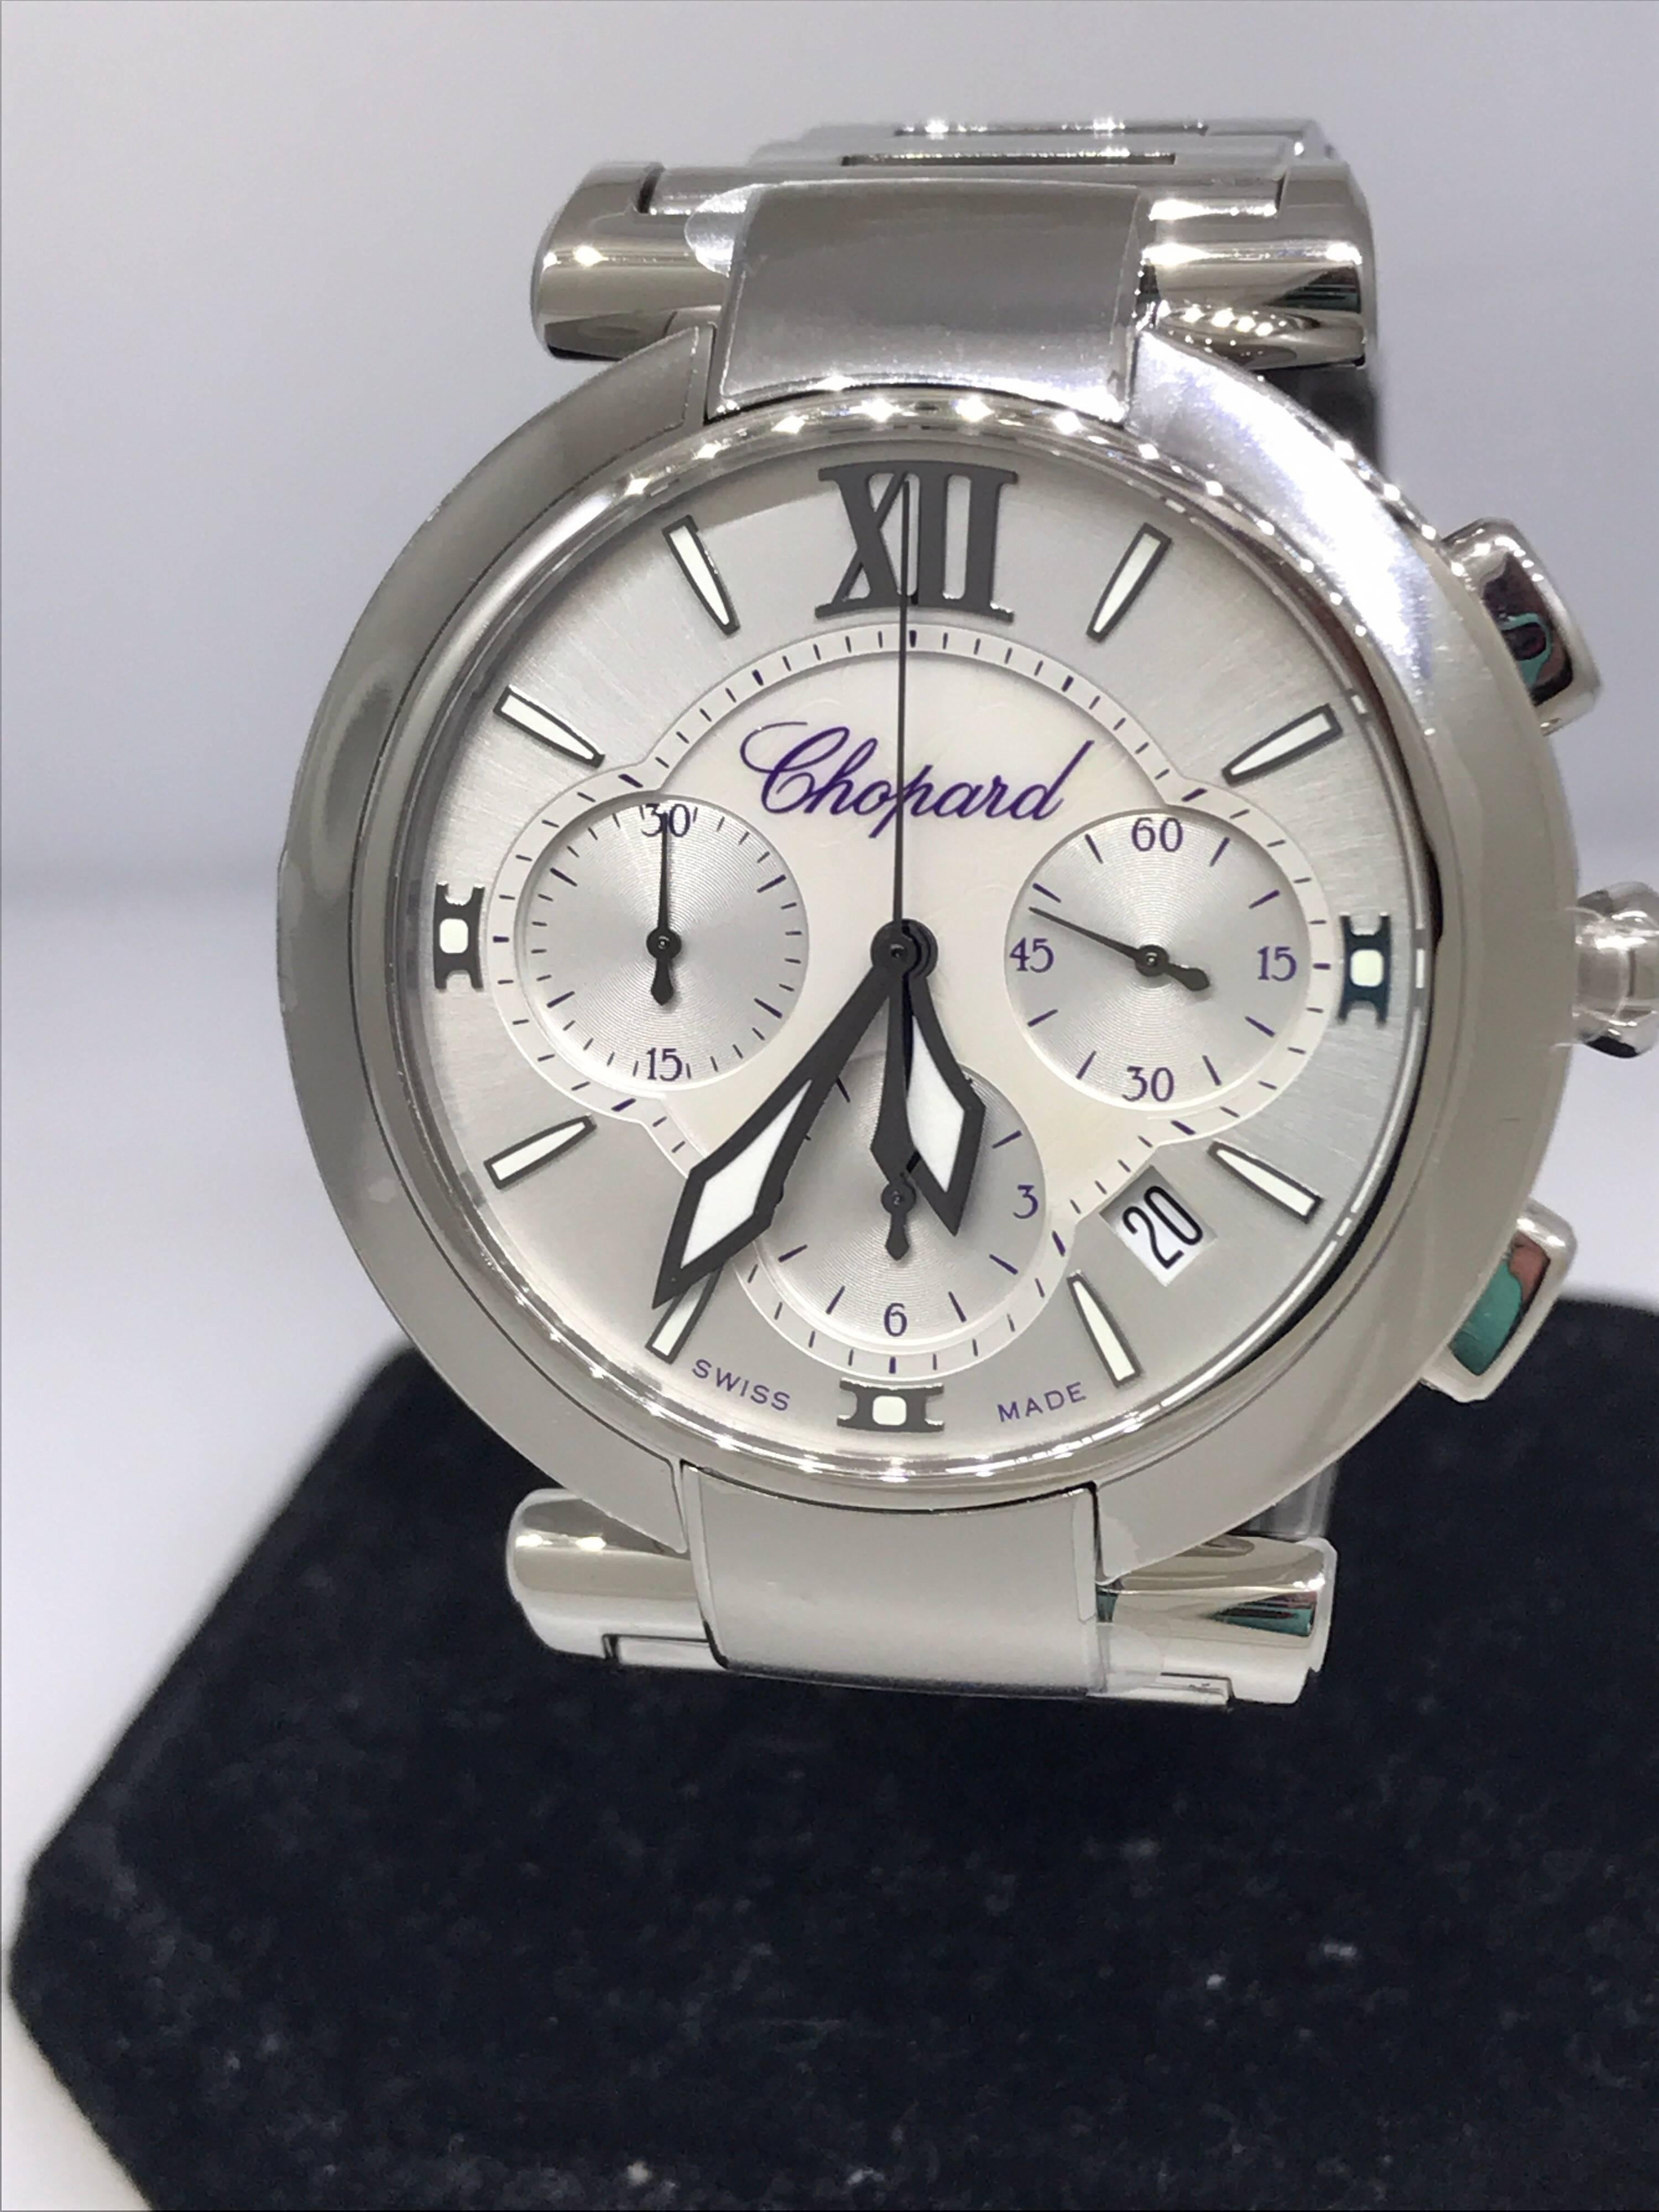 Chopard Imperiale Ladies Watch

Model Number: 15/8912-3001

100% Authentic

Brand New 

Comes with original Chopard box, certificate of authenticity and warranty and instruction manual

Stainless Steel Case & Bracelet

Mother of Pearl Dial

Index